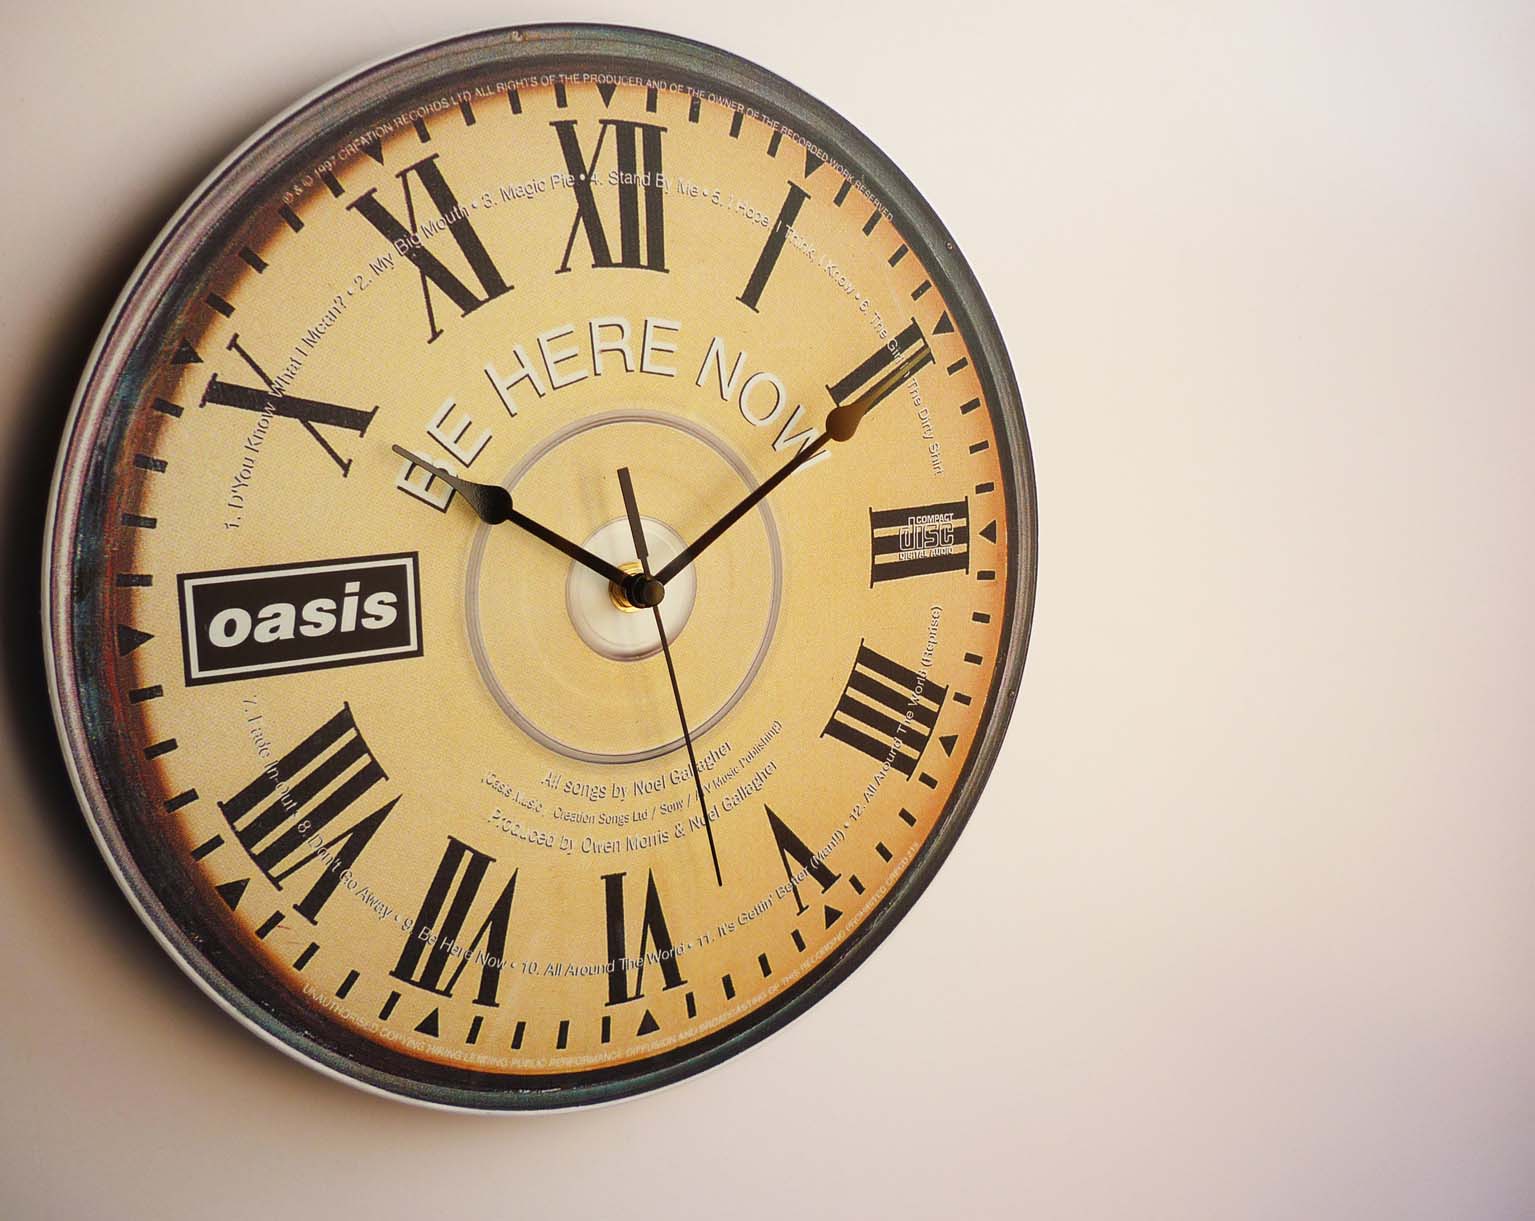 Oasis – Be Here Now CD Art – 12″ LP Vinyl Record Wall Clock